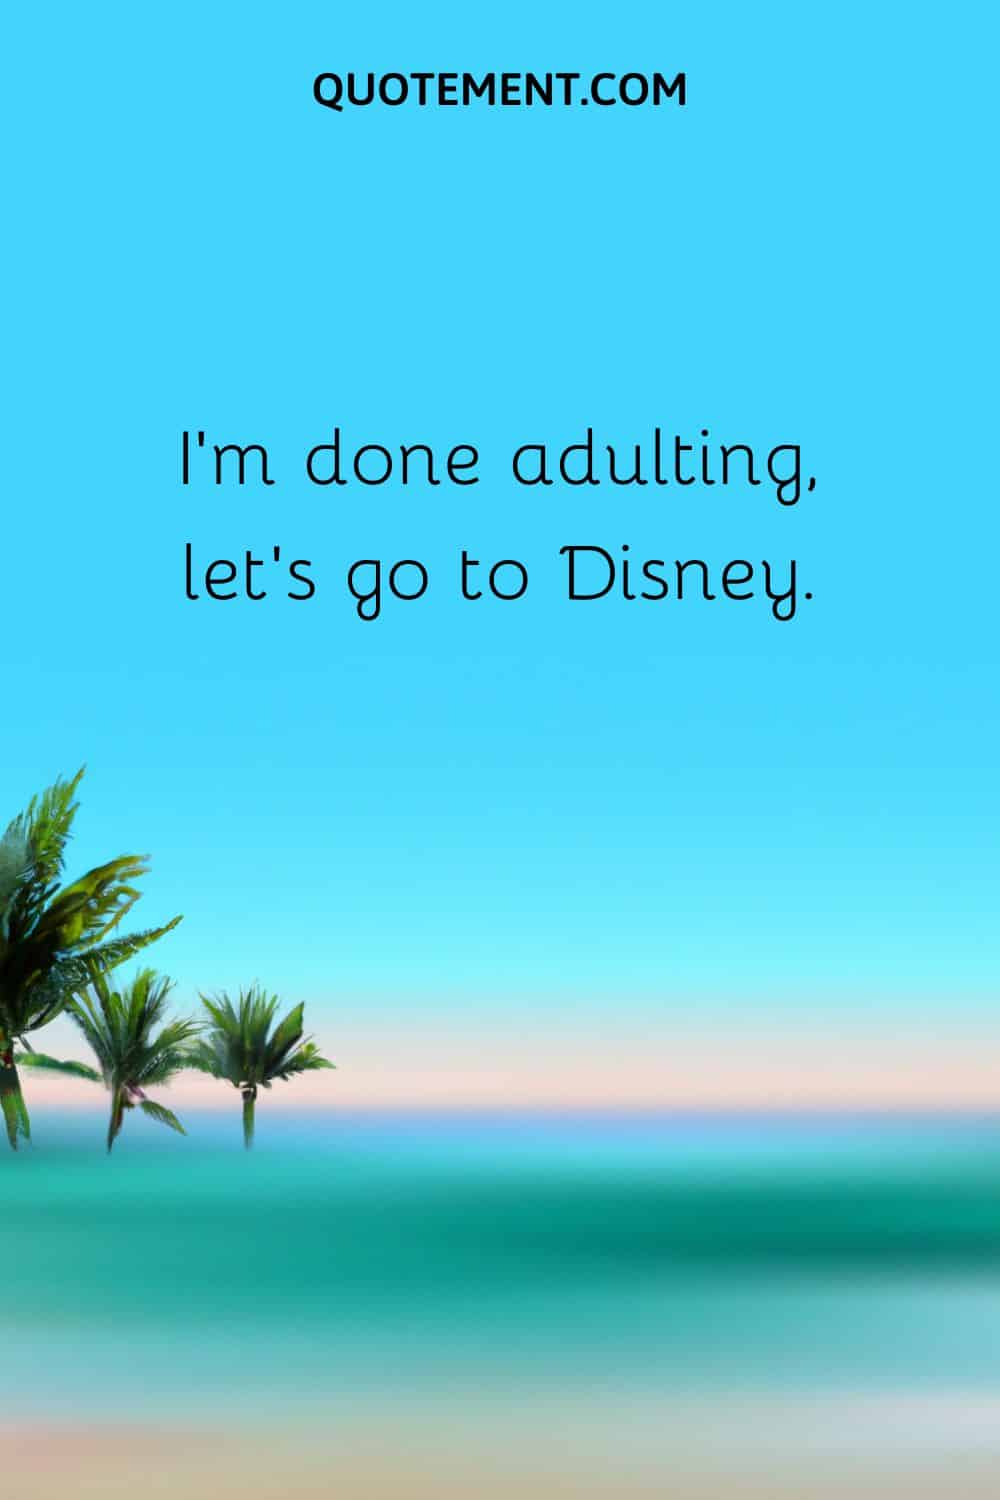 I’m done adulting, let’s go to Disney